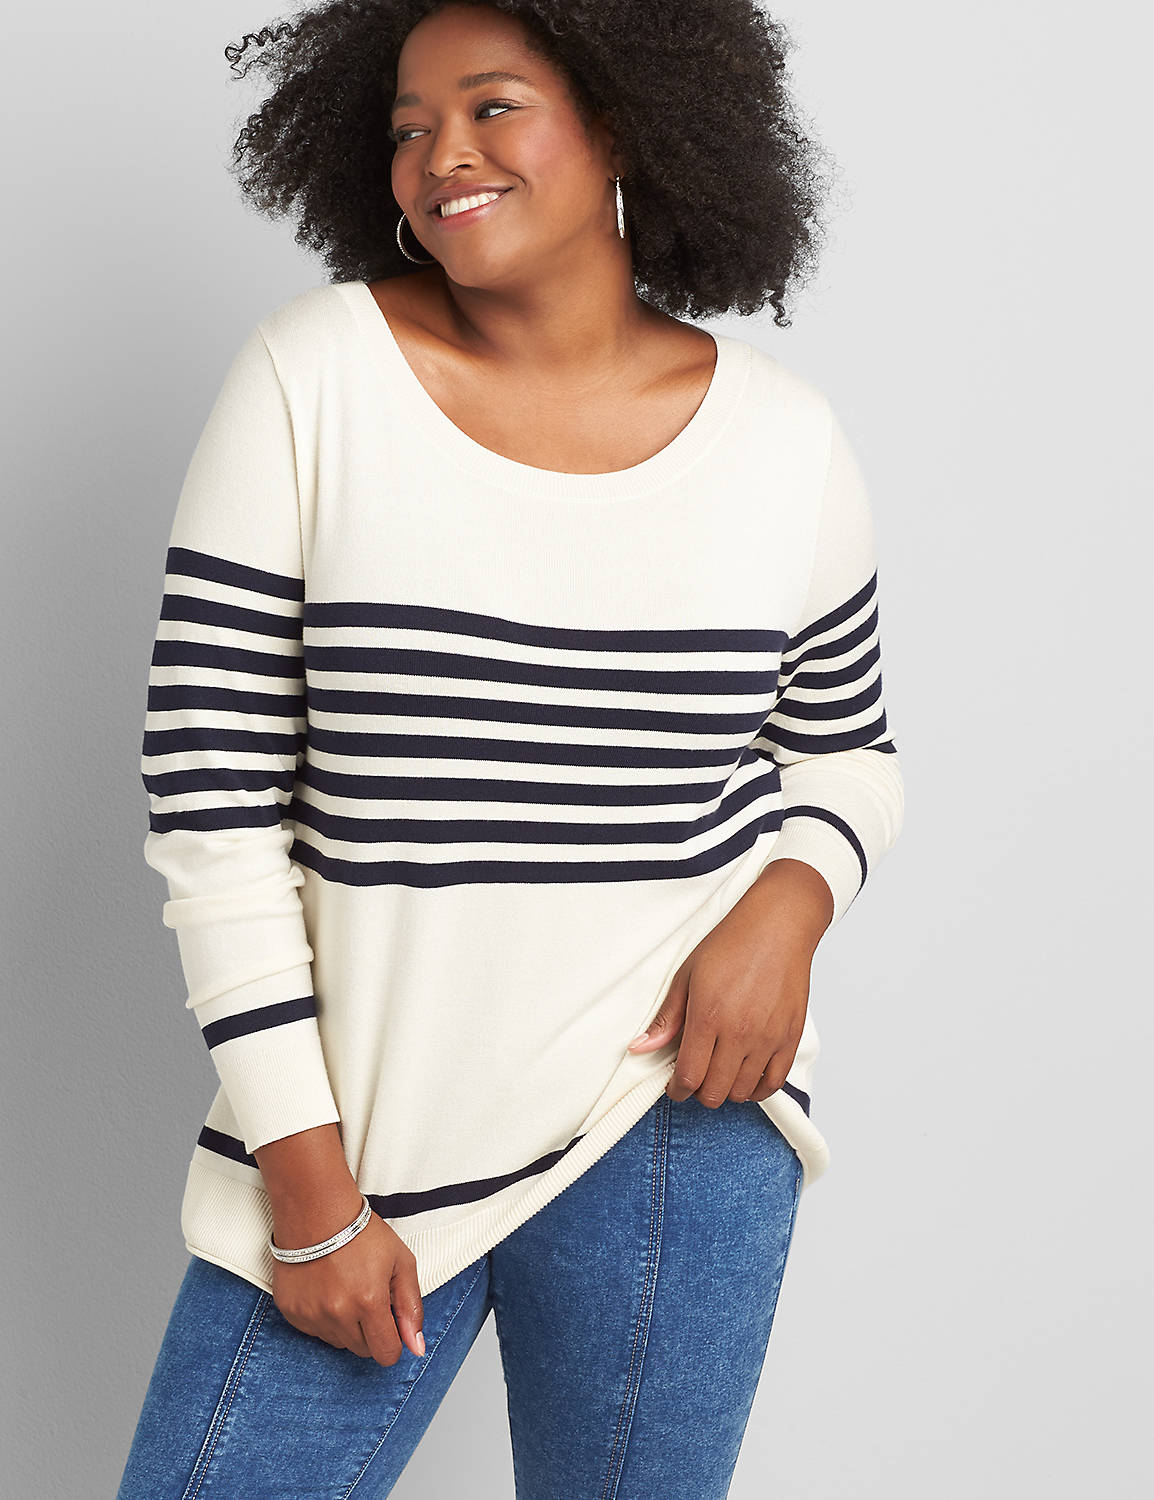 Long Sleeve Open Crew Neck Sweater with Stripes 1117590:PANTONE Pristine:10/12 Product Image 1